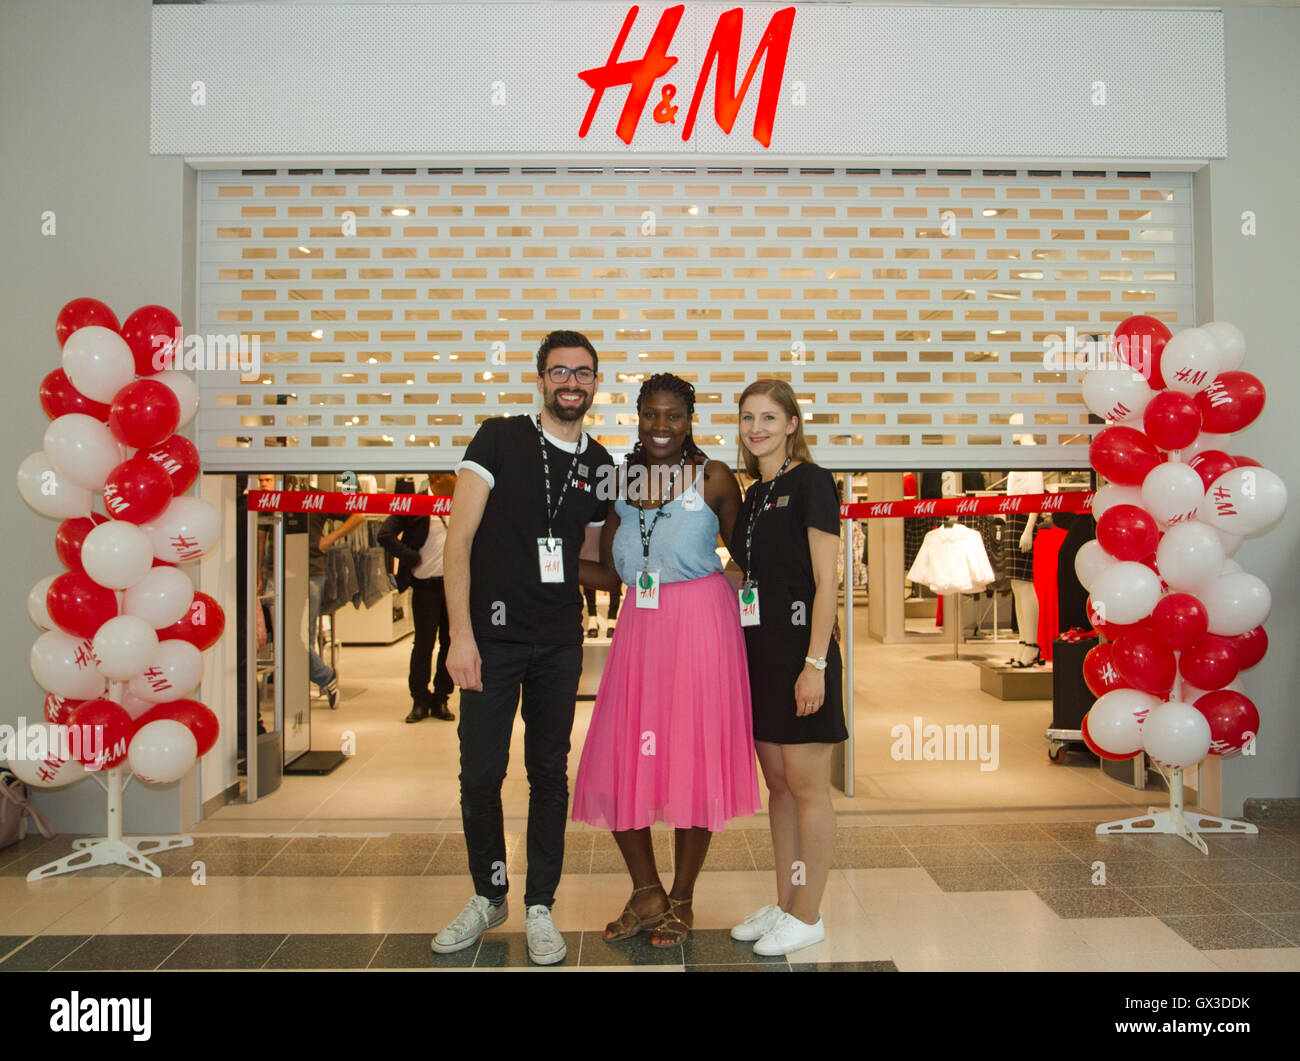 London, UK. 15th September 2016. H&M staff (l-r) Fabrizio, Yanick and Edyta  outside the new H&M store opening in Ilford. Ilford residents and visitors  queue up as a new H&M store opens